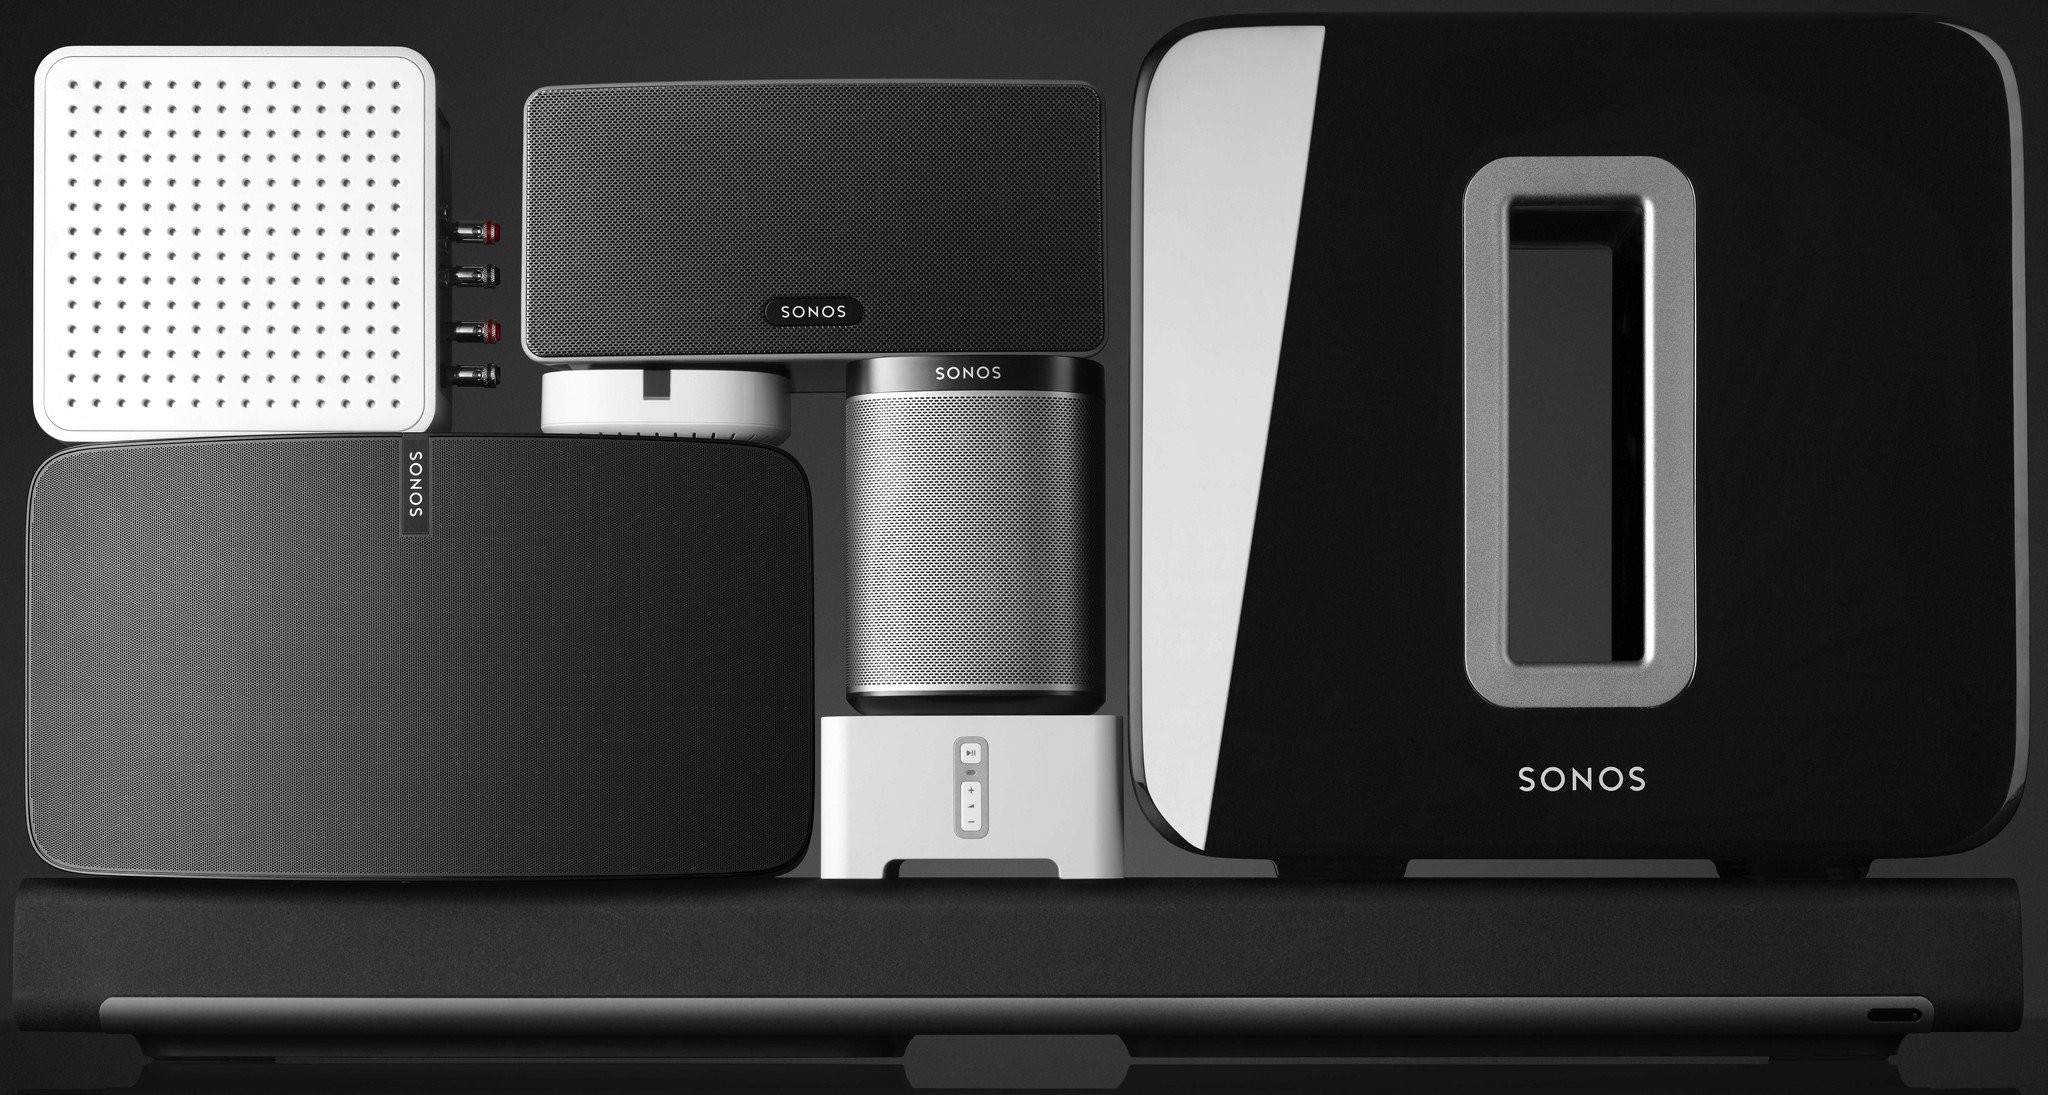 maak een foto Barcelona voor eeuwig How to manage your Sonos system with iPhone and iPad | iMore